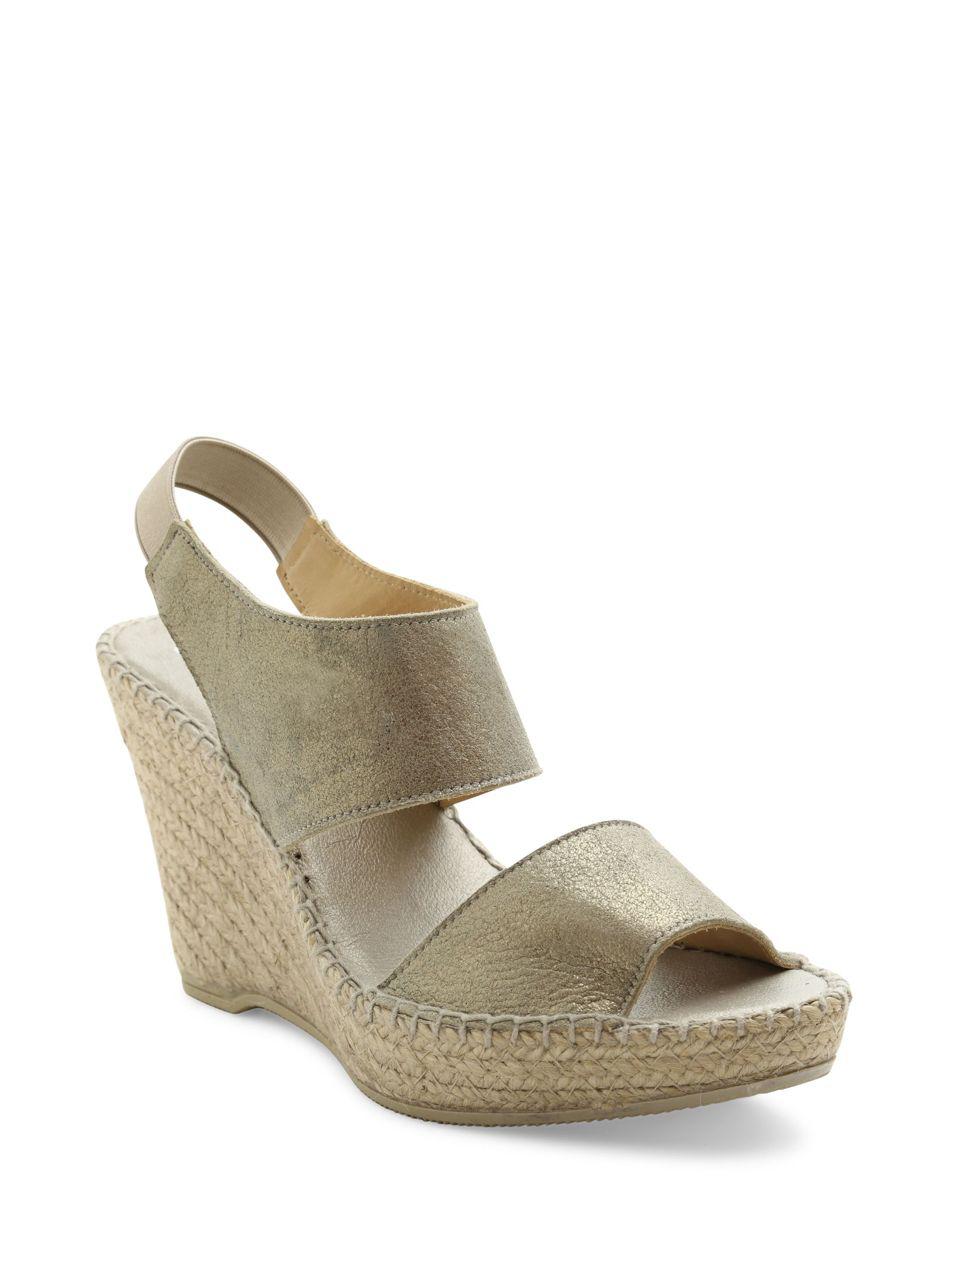 Lyst - Andre Assous Reese Suede Platform Wedge Sandals in Purple